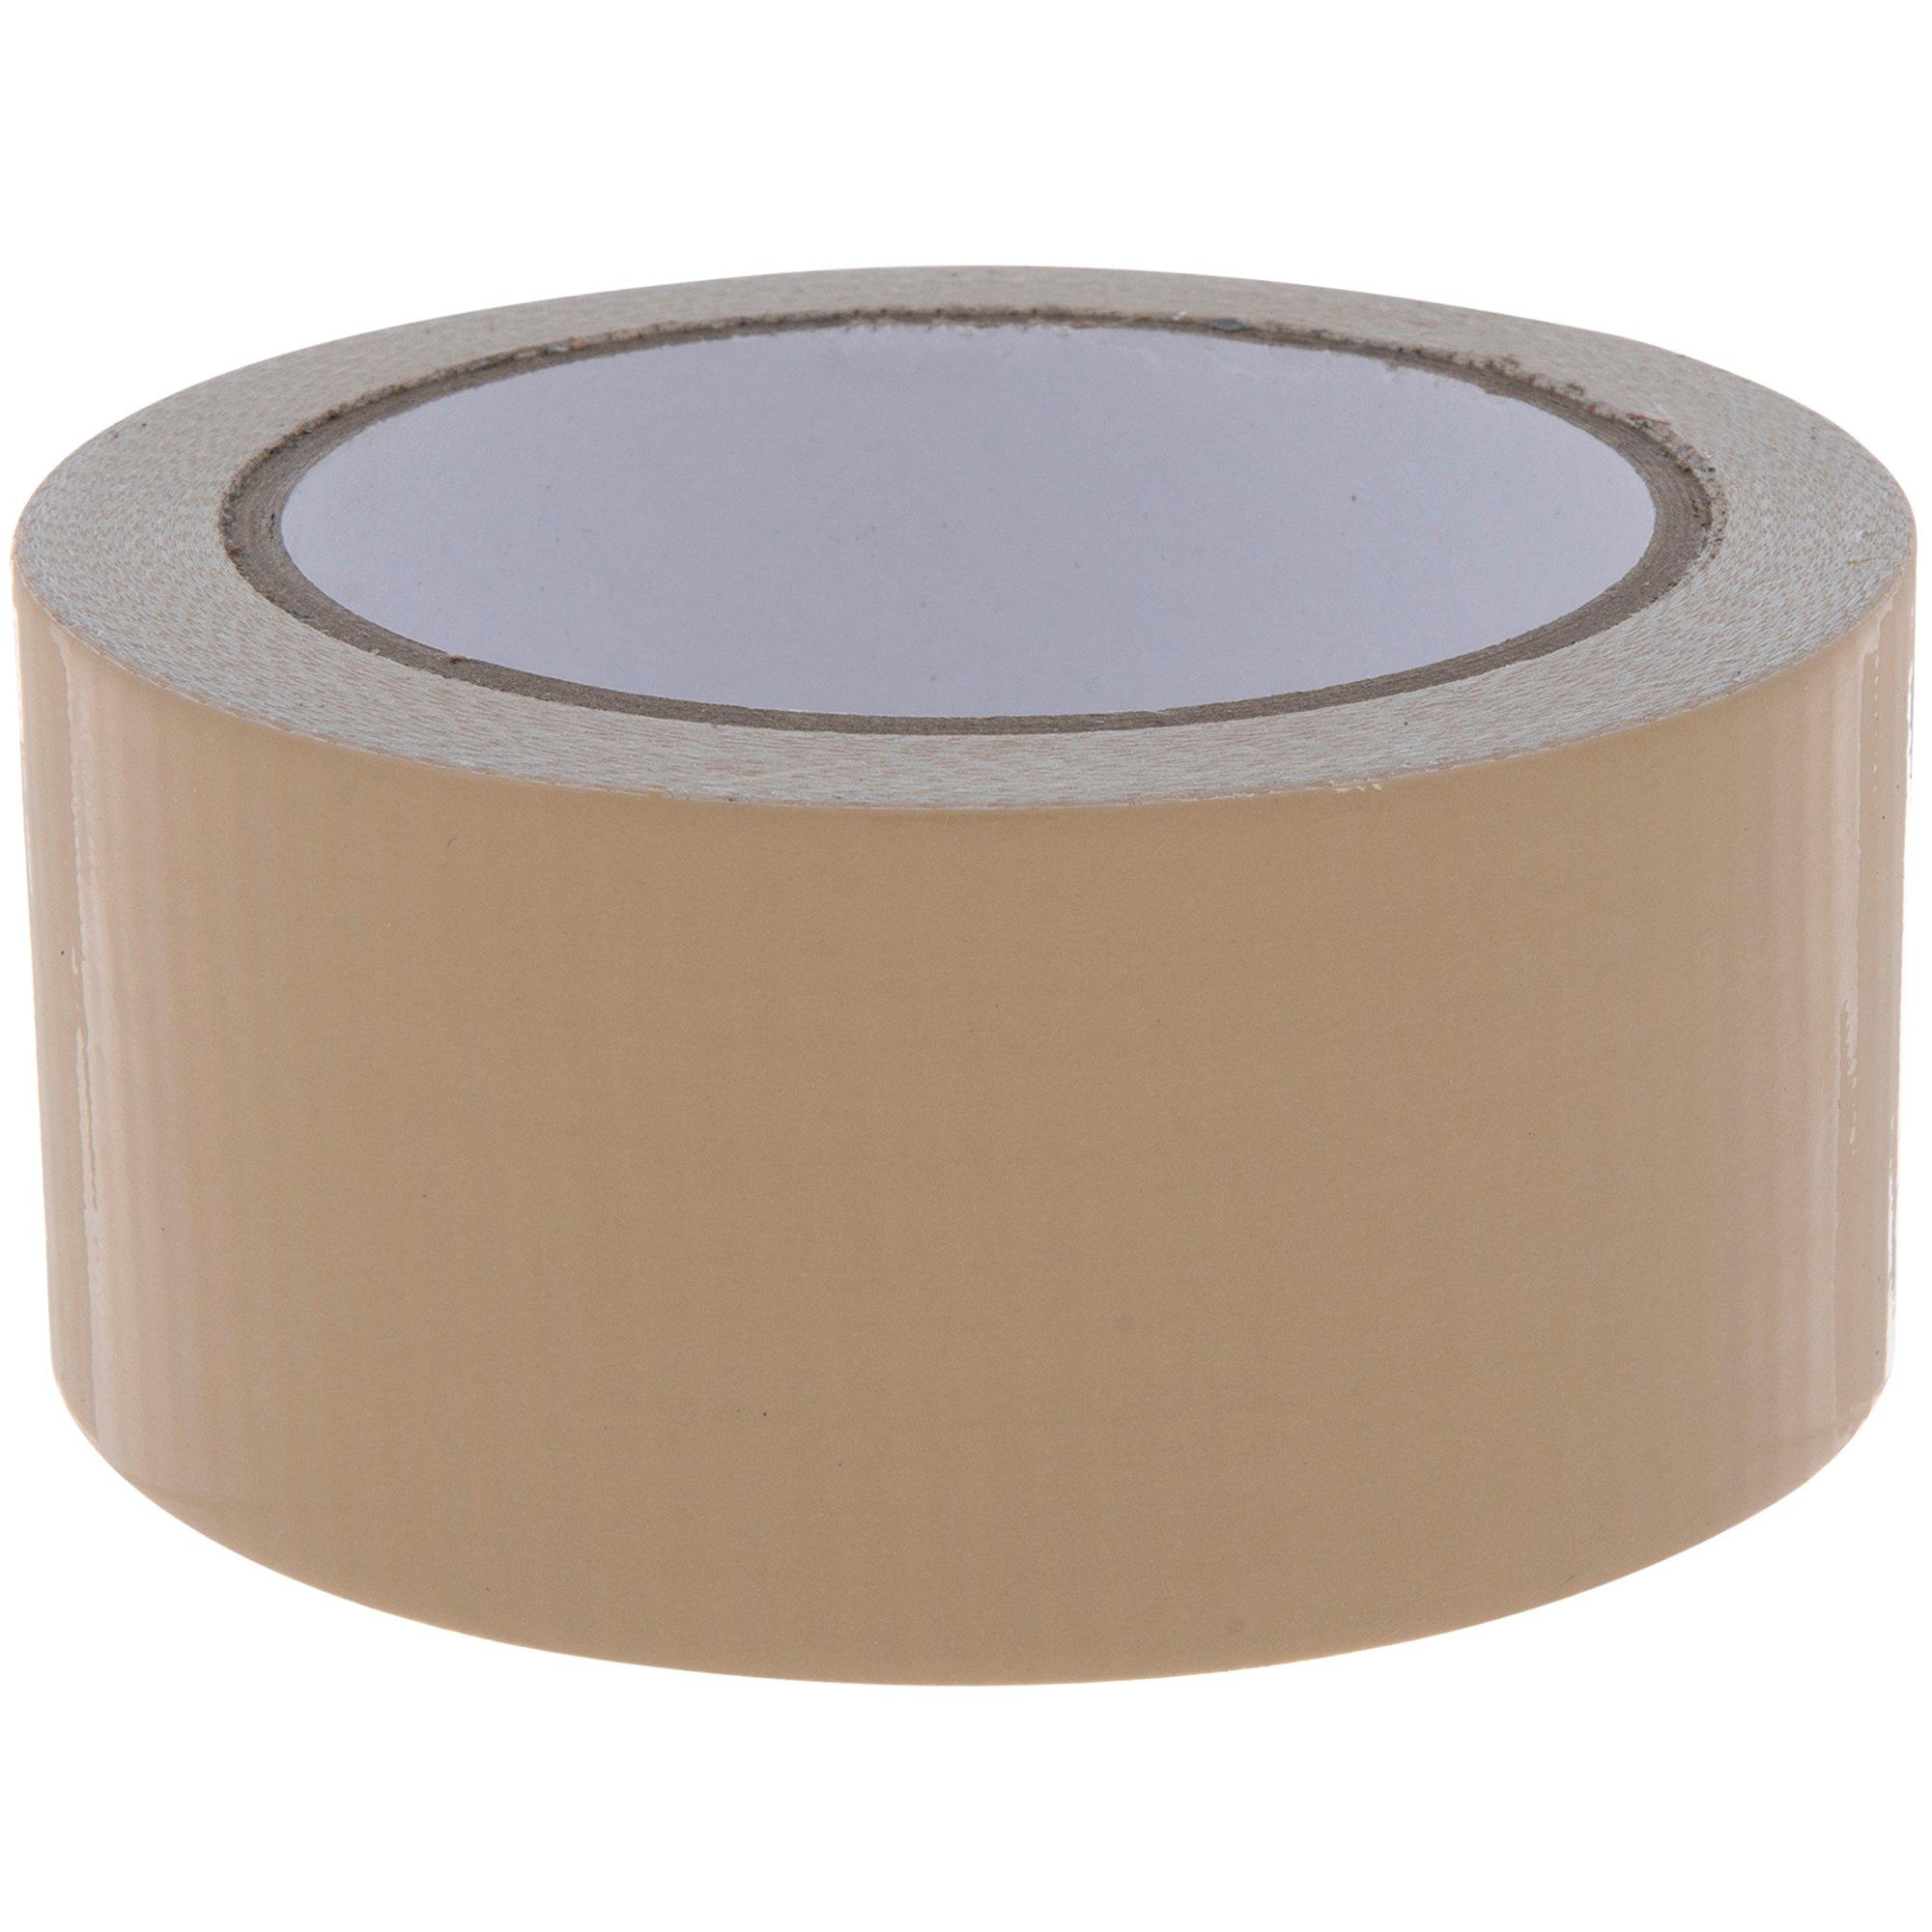 Scrapbook Tape Yellow, Paper Tape Crafts, Acrylic Adhesive Tape